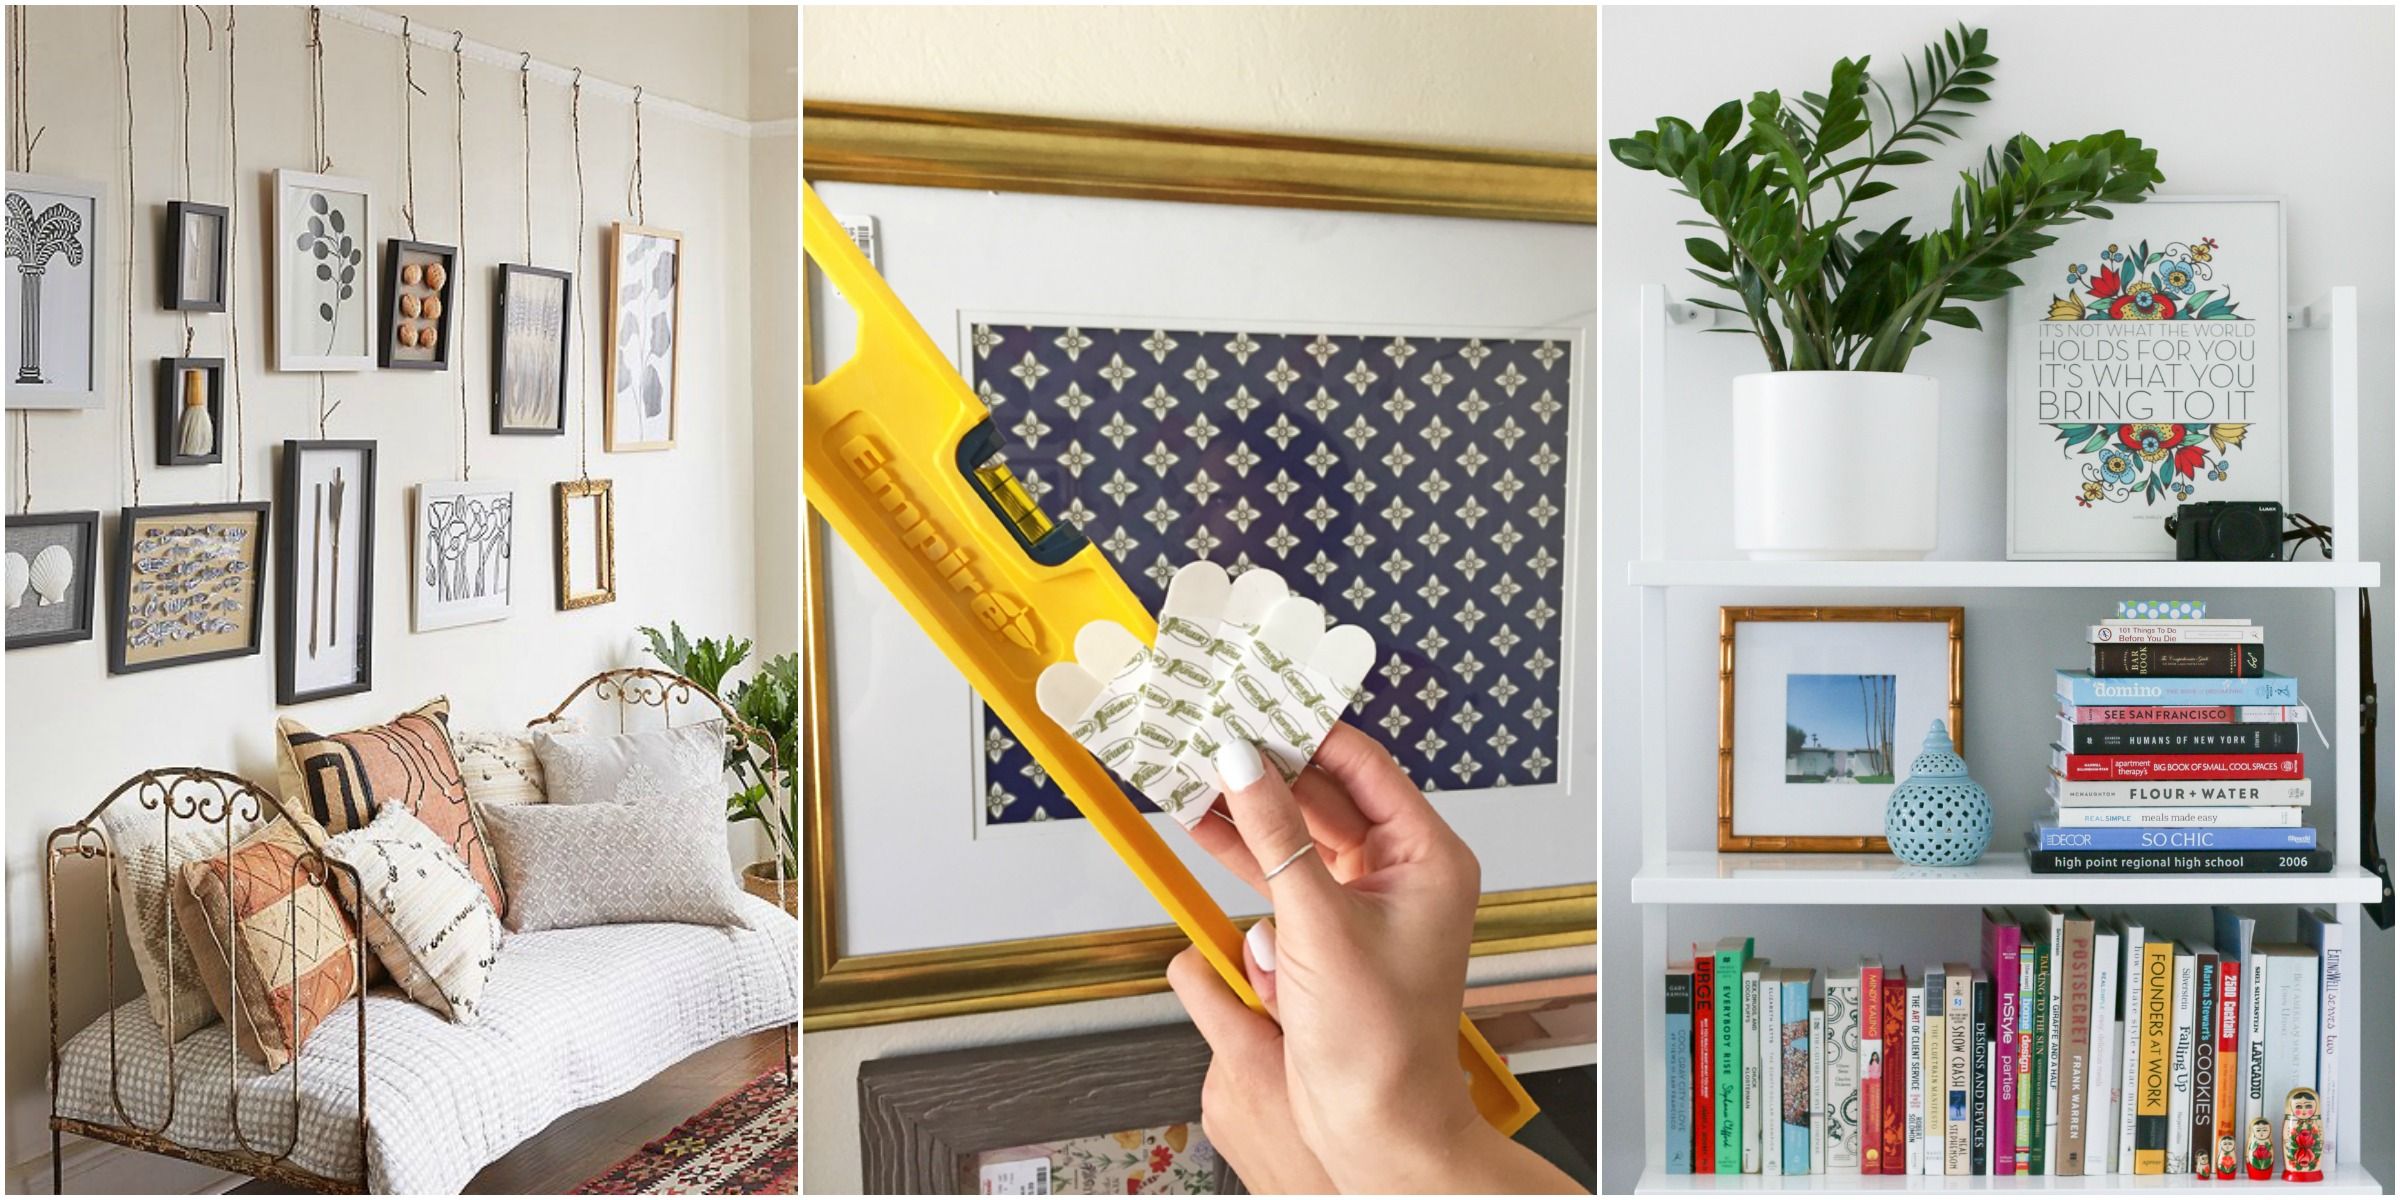 Hang Art Without Nails How To, How Do You Secure A Bookcase To The Wall Without Drilling